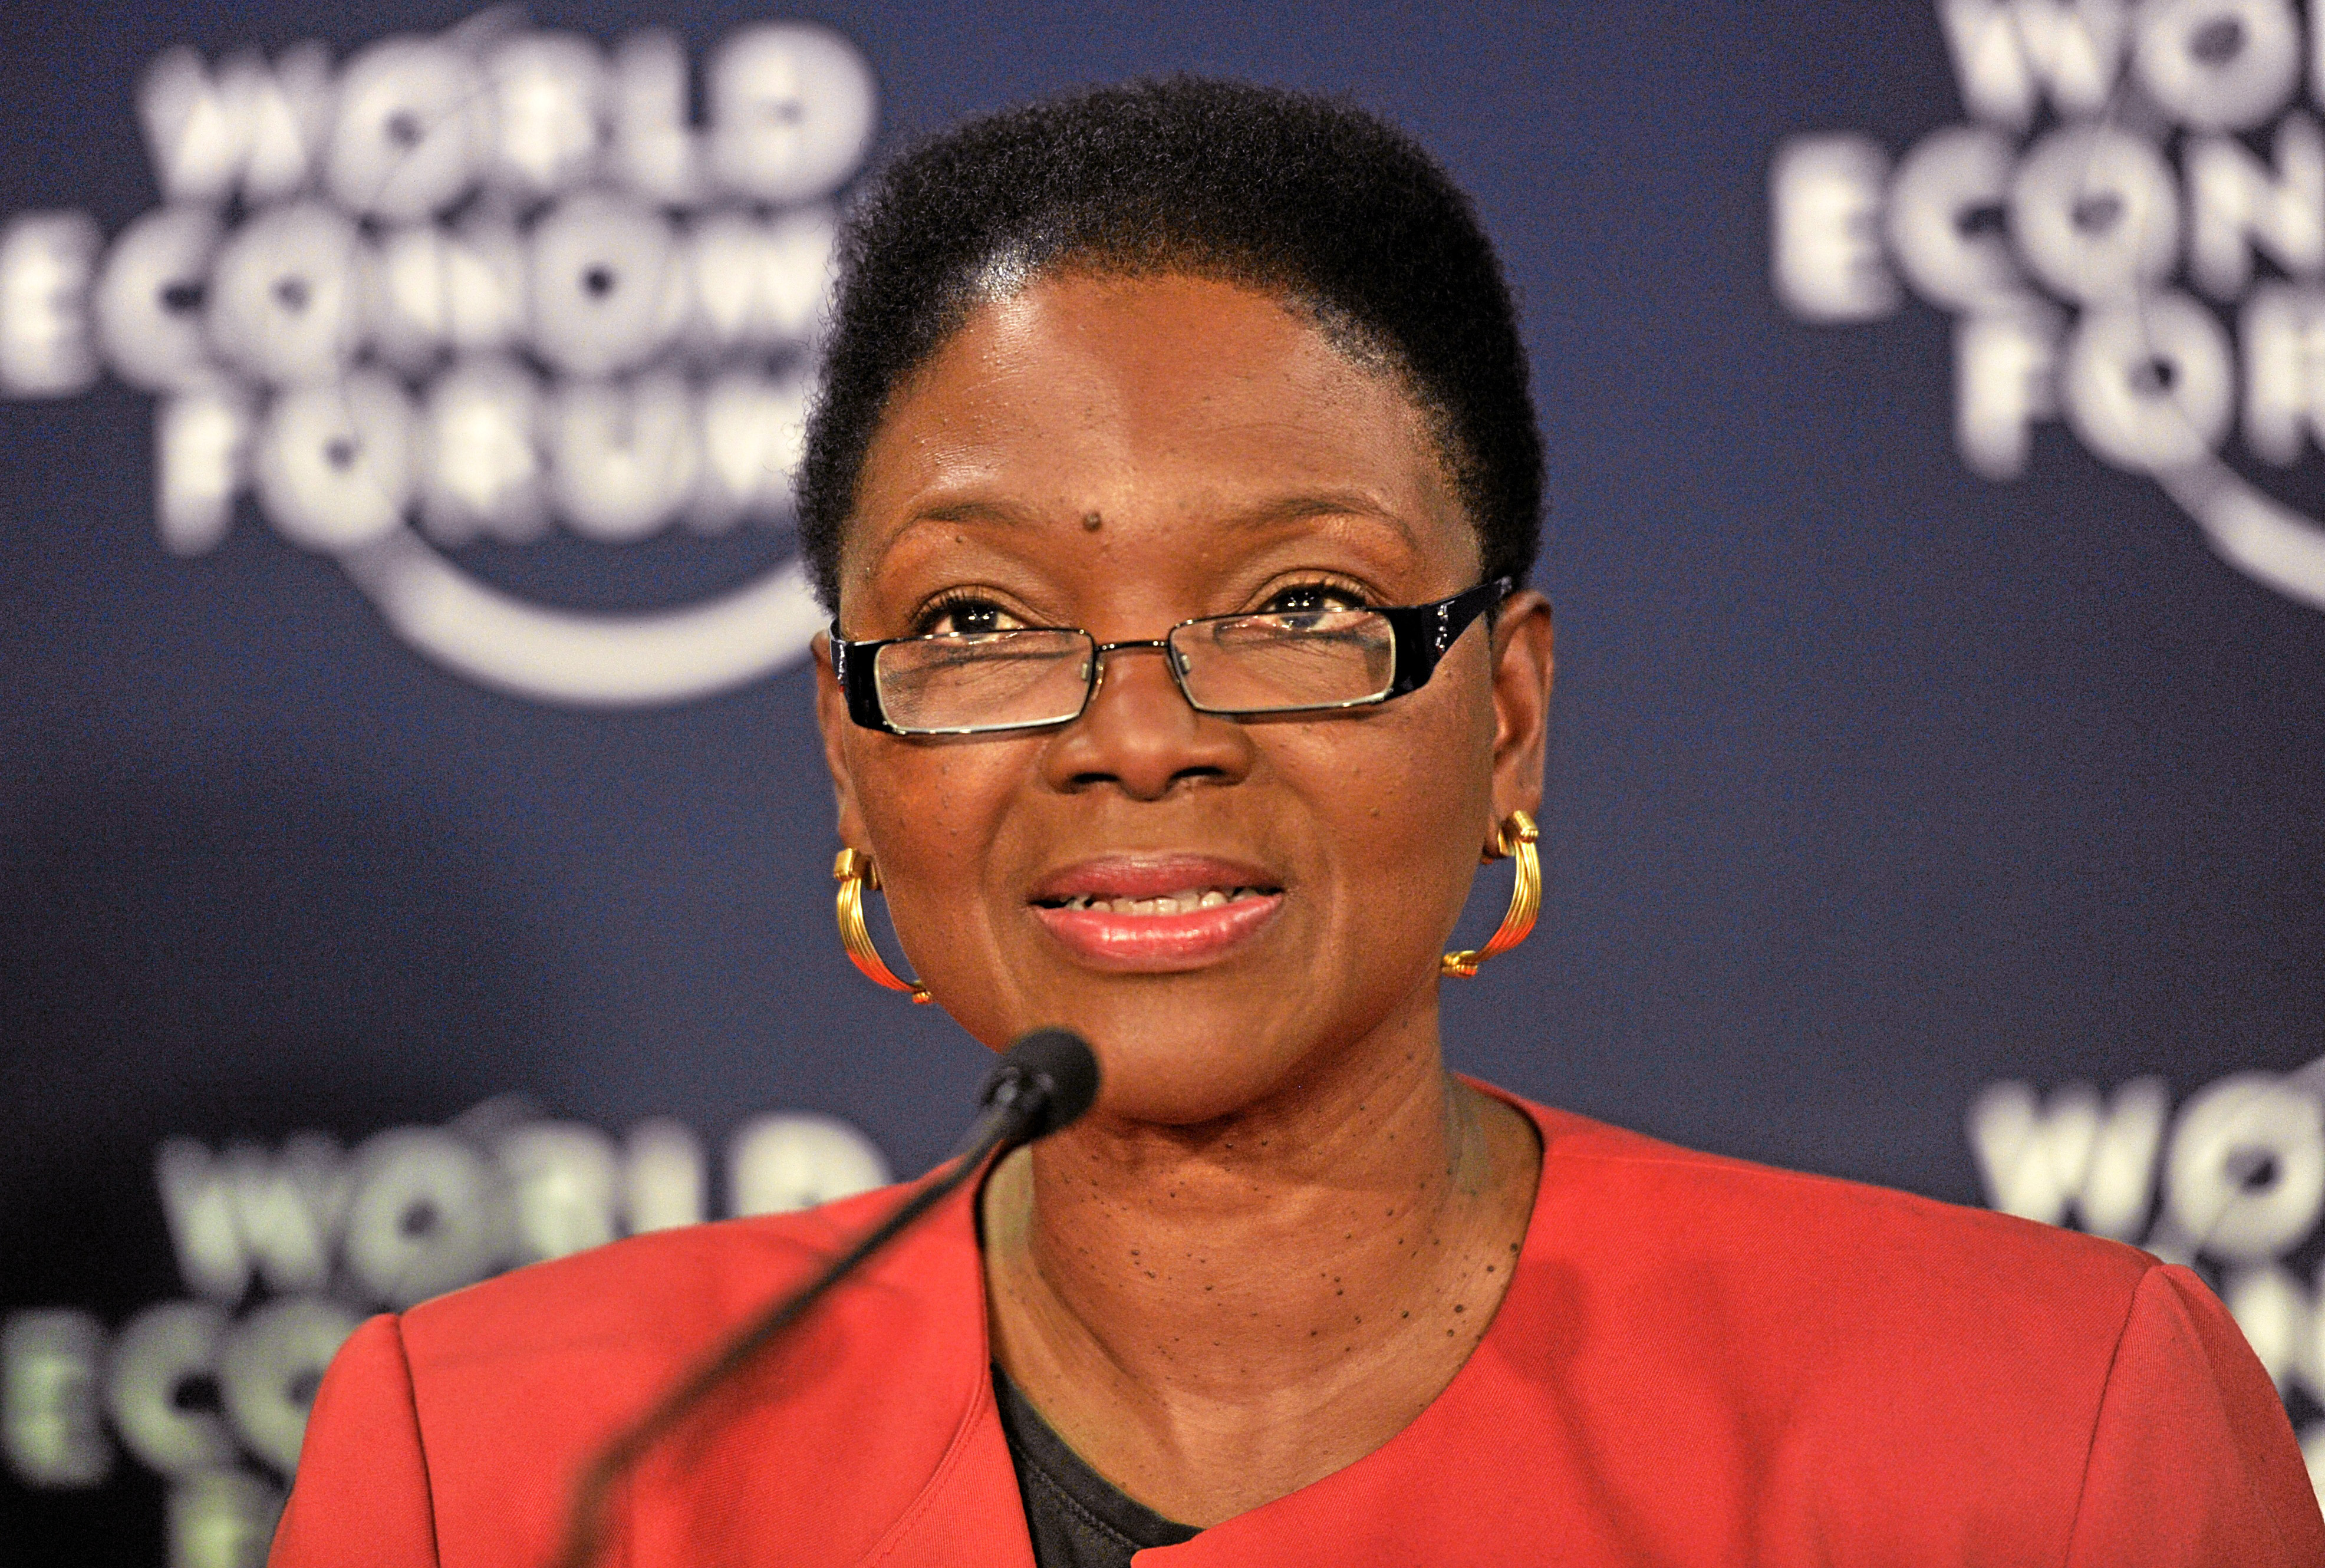 Baroness Valerie Amos, Undersecretary-General for Humanitarian Affairs and Emergency Relief Coordinator, United Nations, New York Photo Credit: Flickr